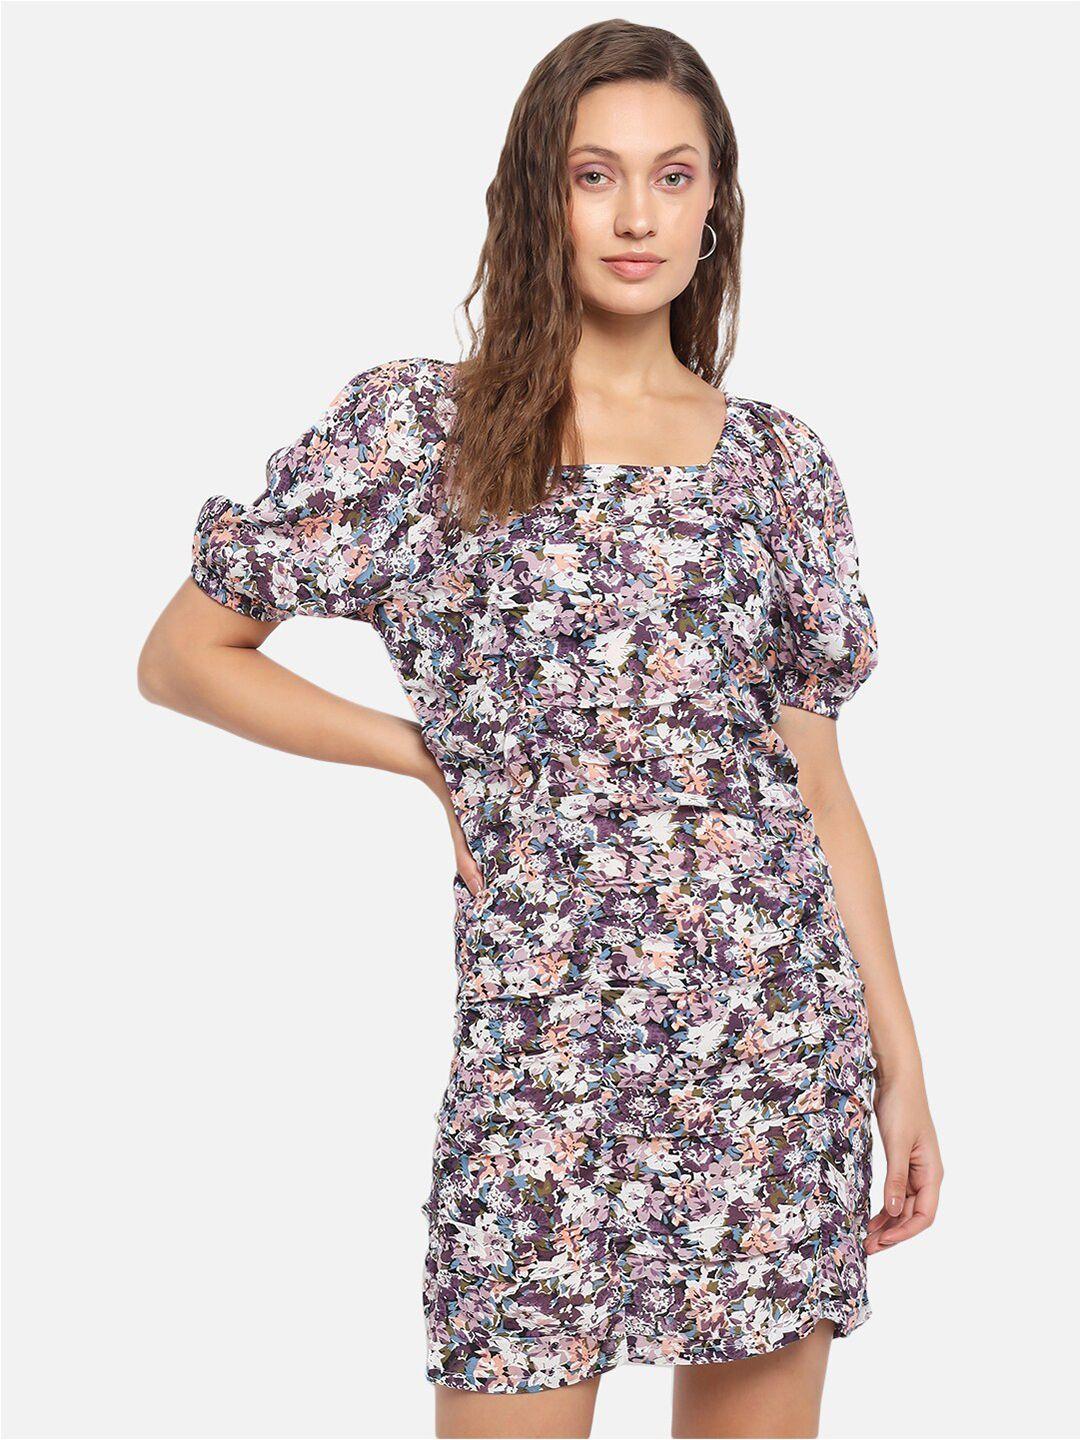 trend arrest purple & white floral printed ruched sheath dress